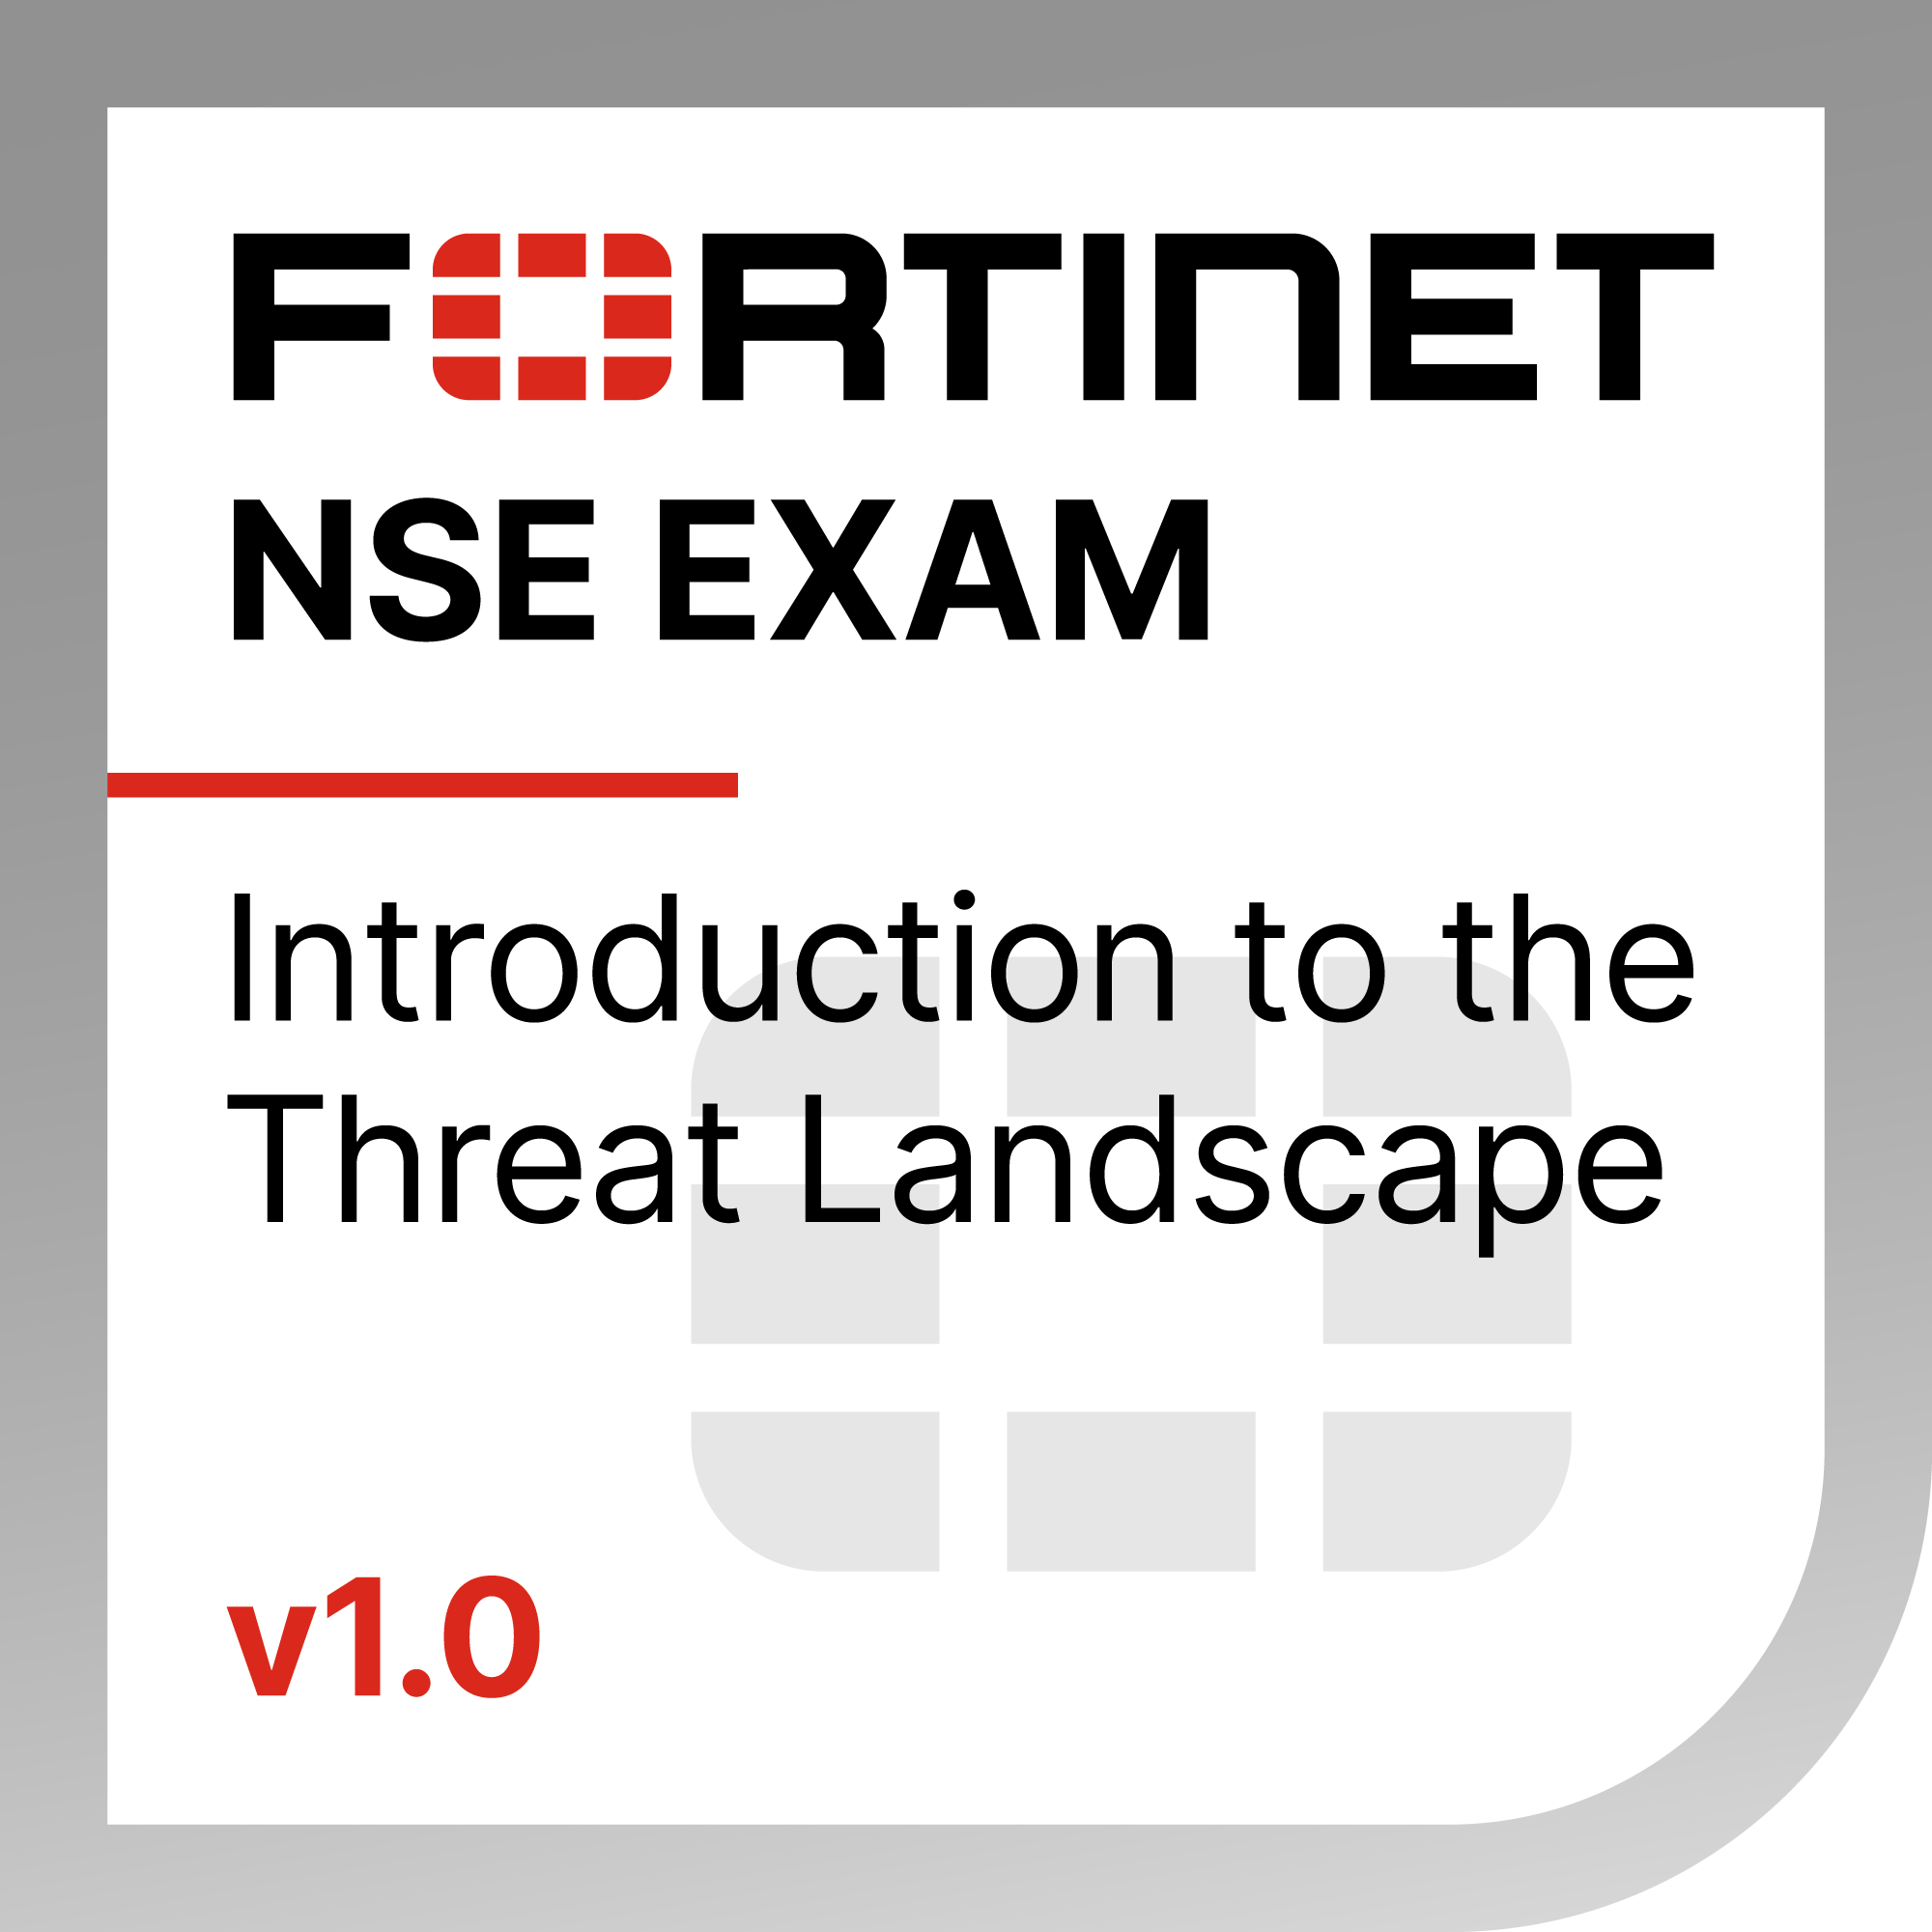 Introduction to the Threat Landscape 1.0